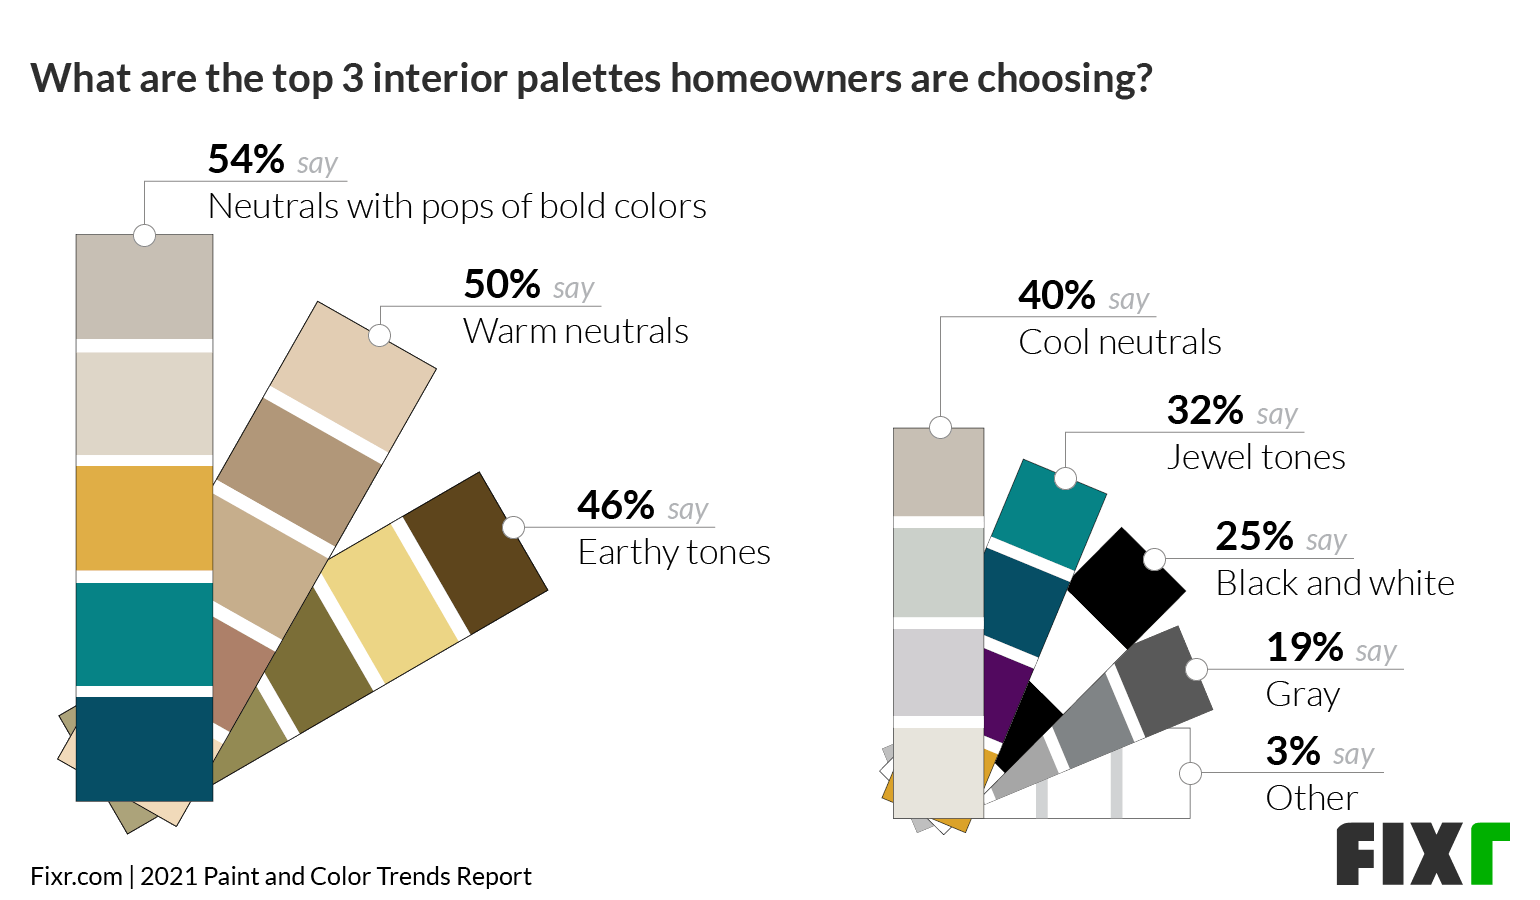 Paint & Color Trends 2021 - Top Interior Color Palettes in 2021 - Neutrals, Earthy Tones.